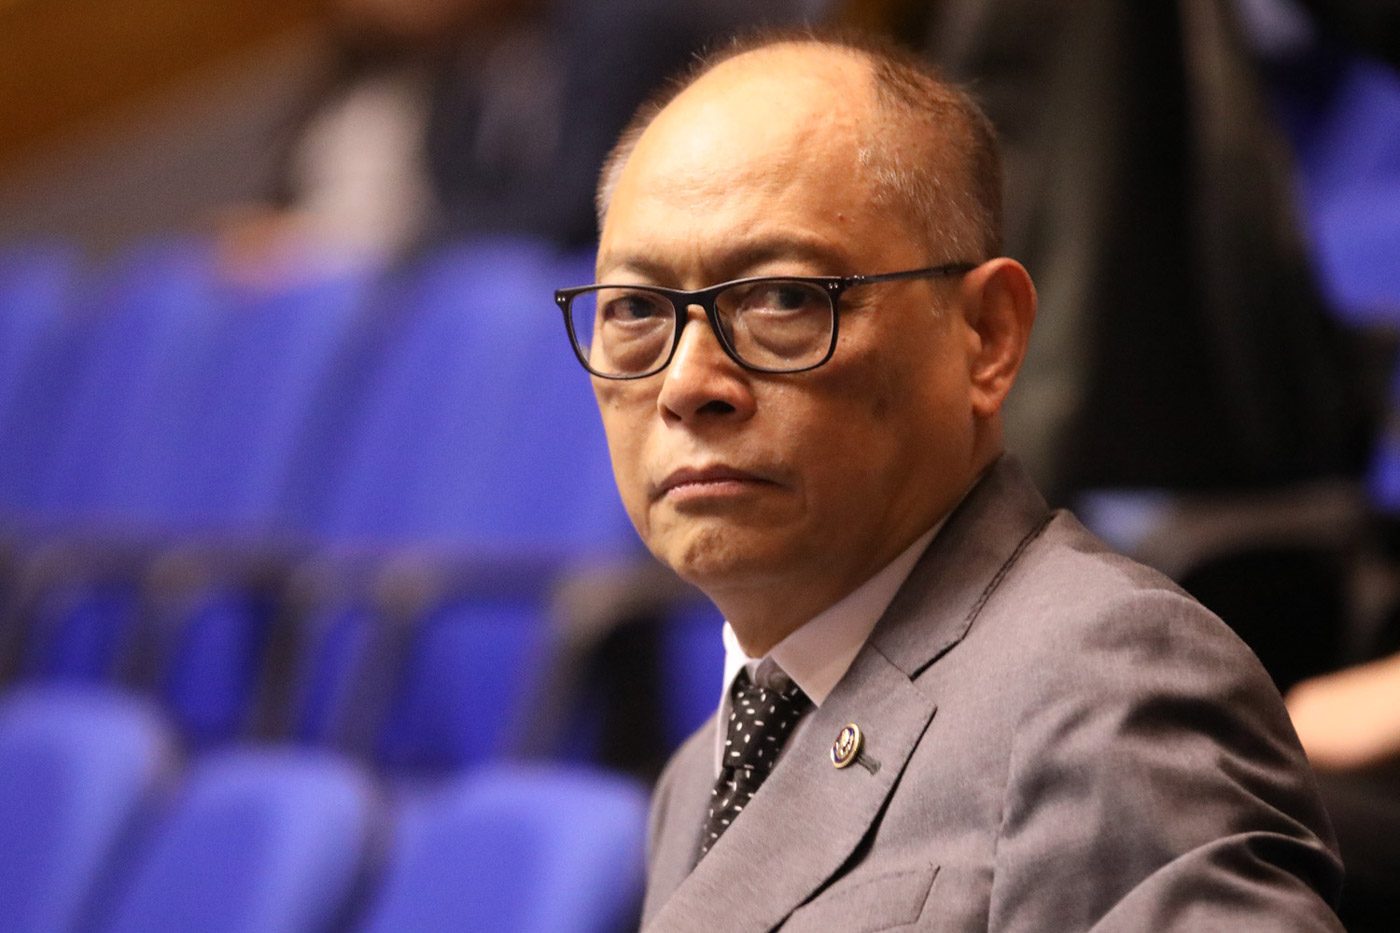 Diokno denies conflict of interest over infra projects in Casiguran, Sorsogon